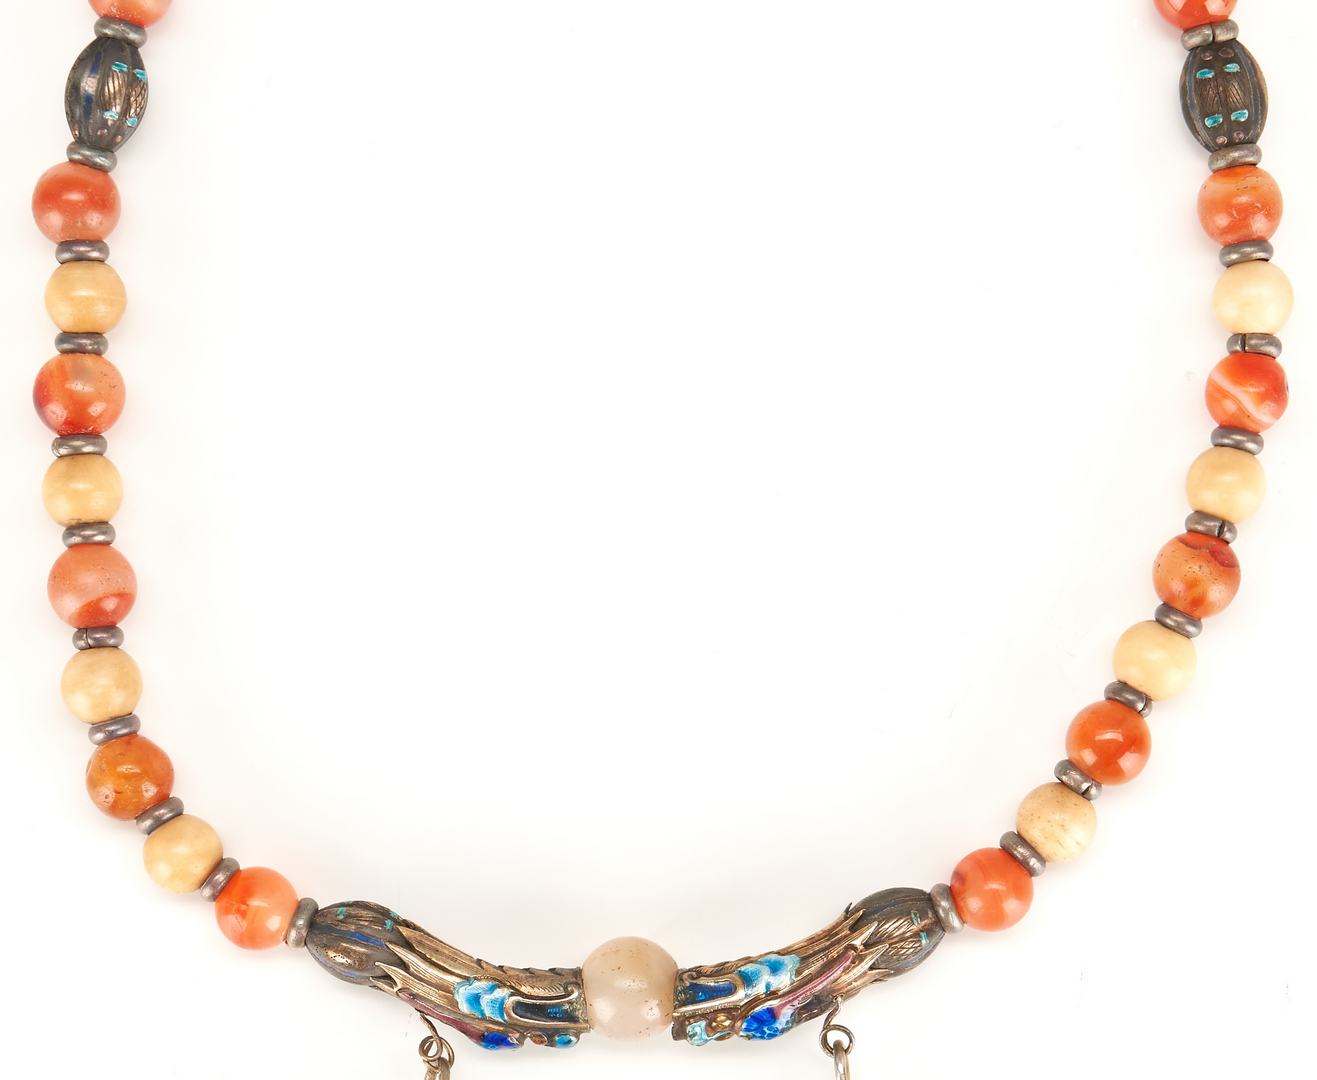 Lot 53: Chinese Silver Pendant & Necklace, Carnelian & Cloisonne Beads